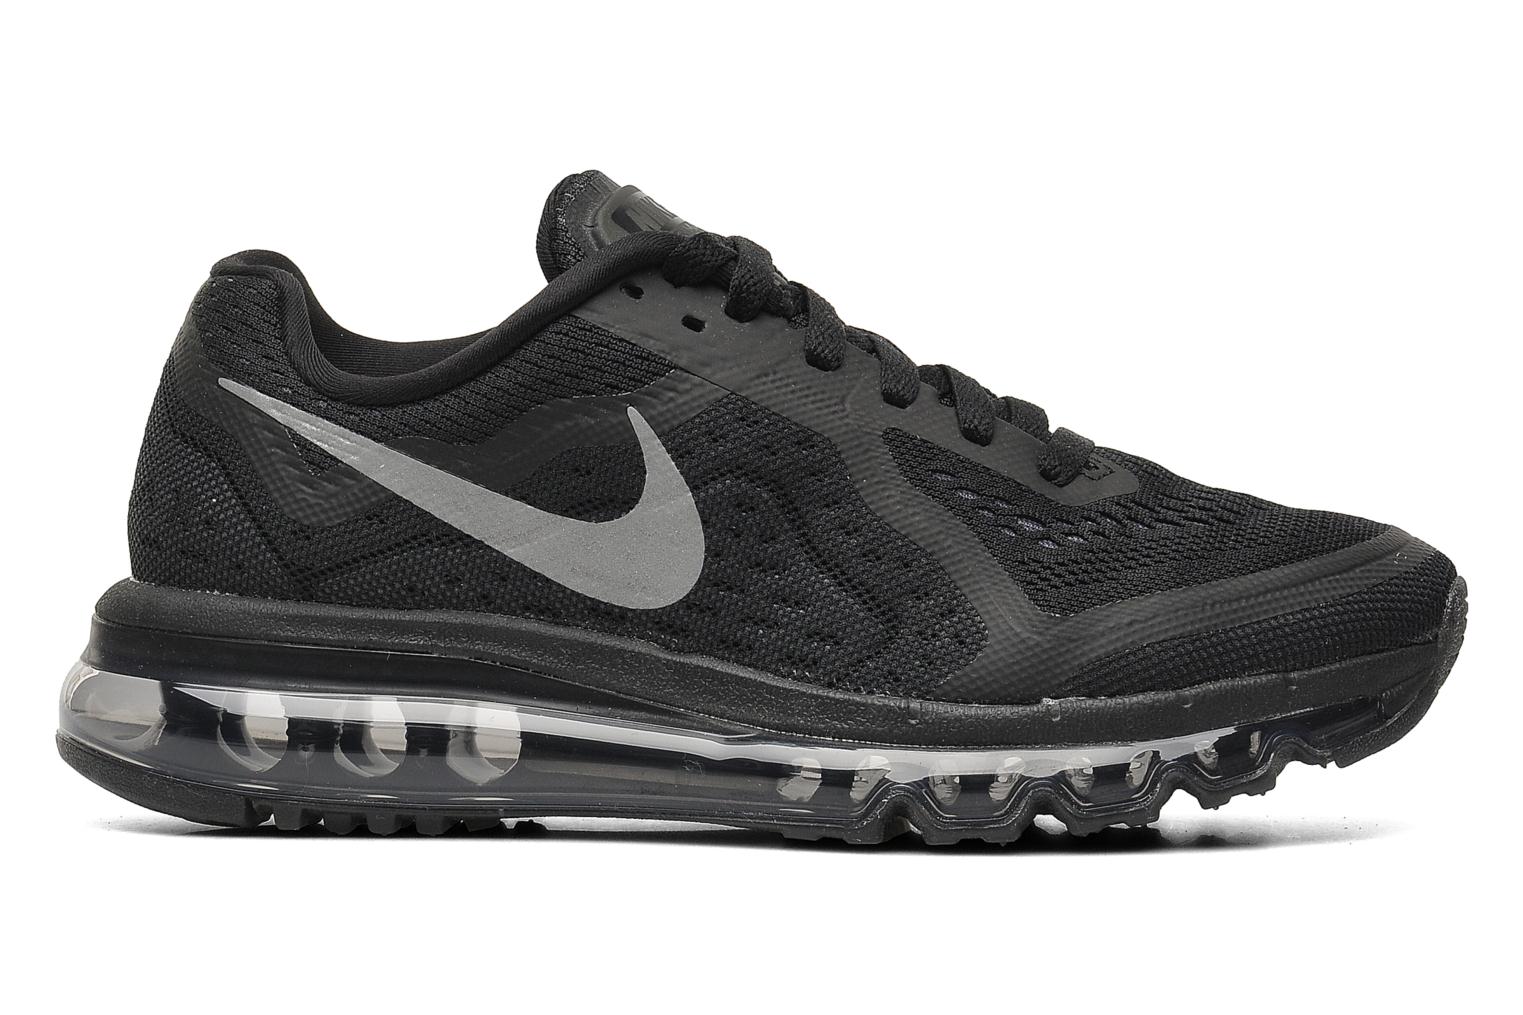 Nike WMNS AIR MAX 2014 Sport shoes in Black at Sarenza.co.uk (196977)